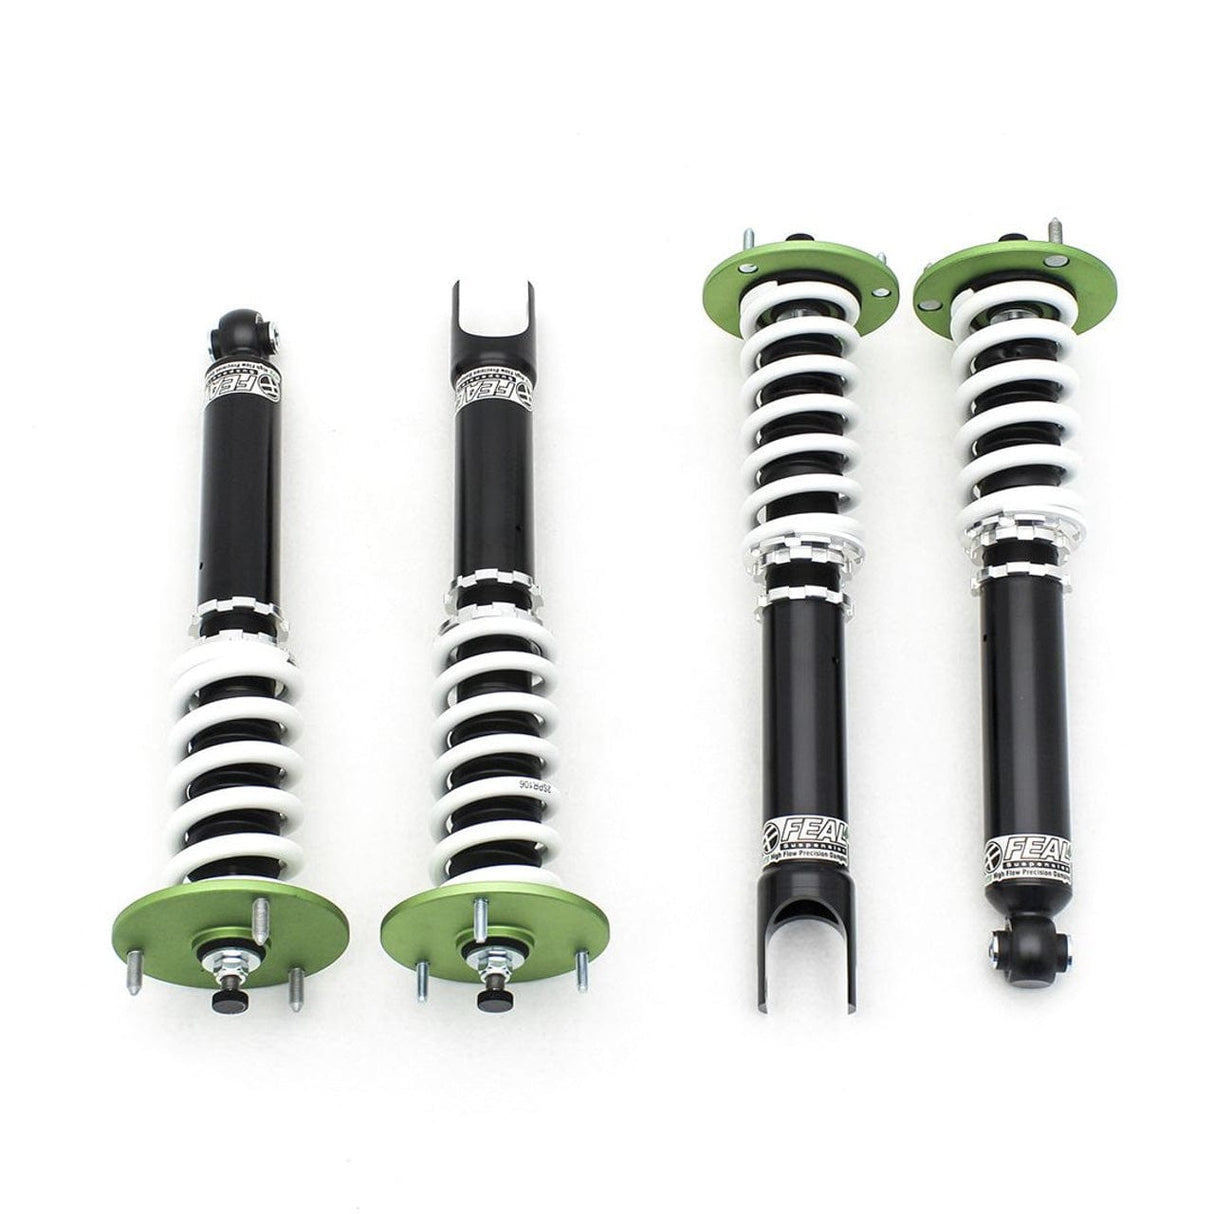 Feal 441 Coilovers - 1979-1993 Ford Mustang Foxbody